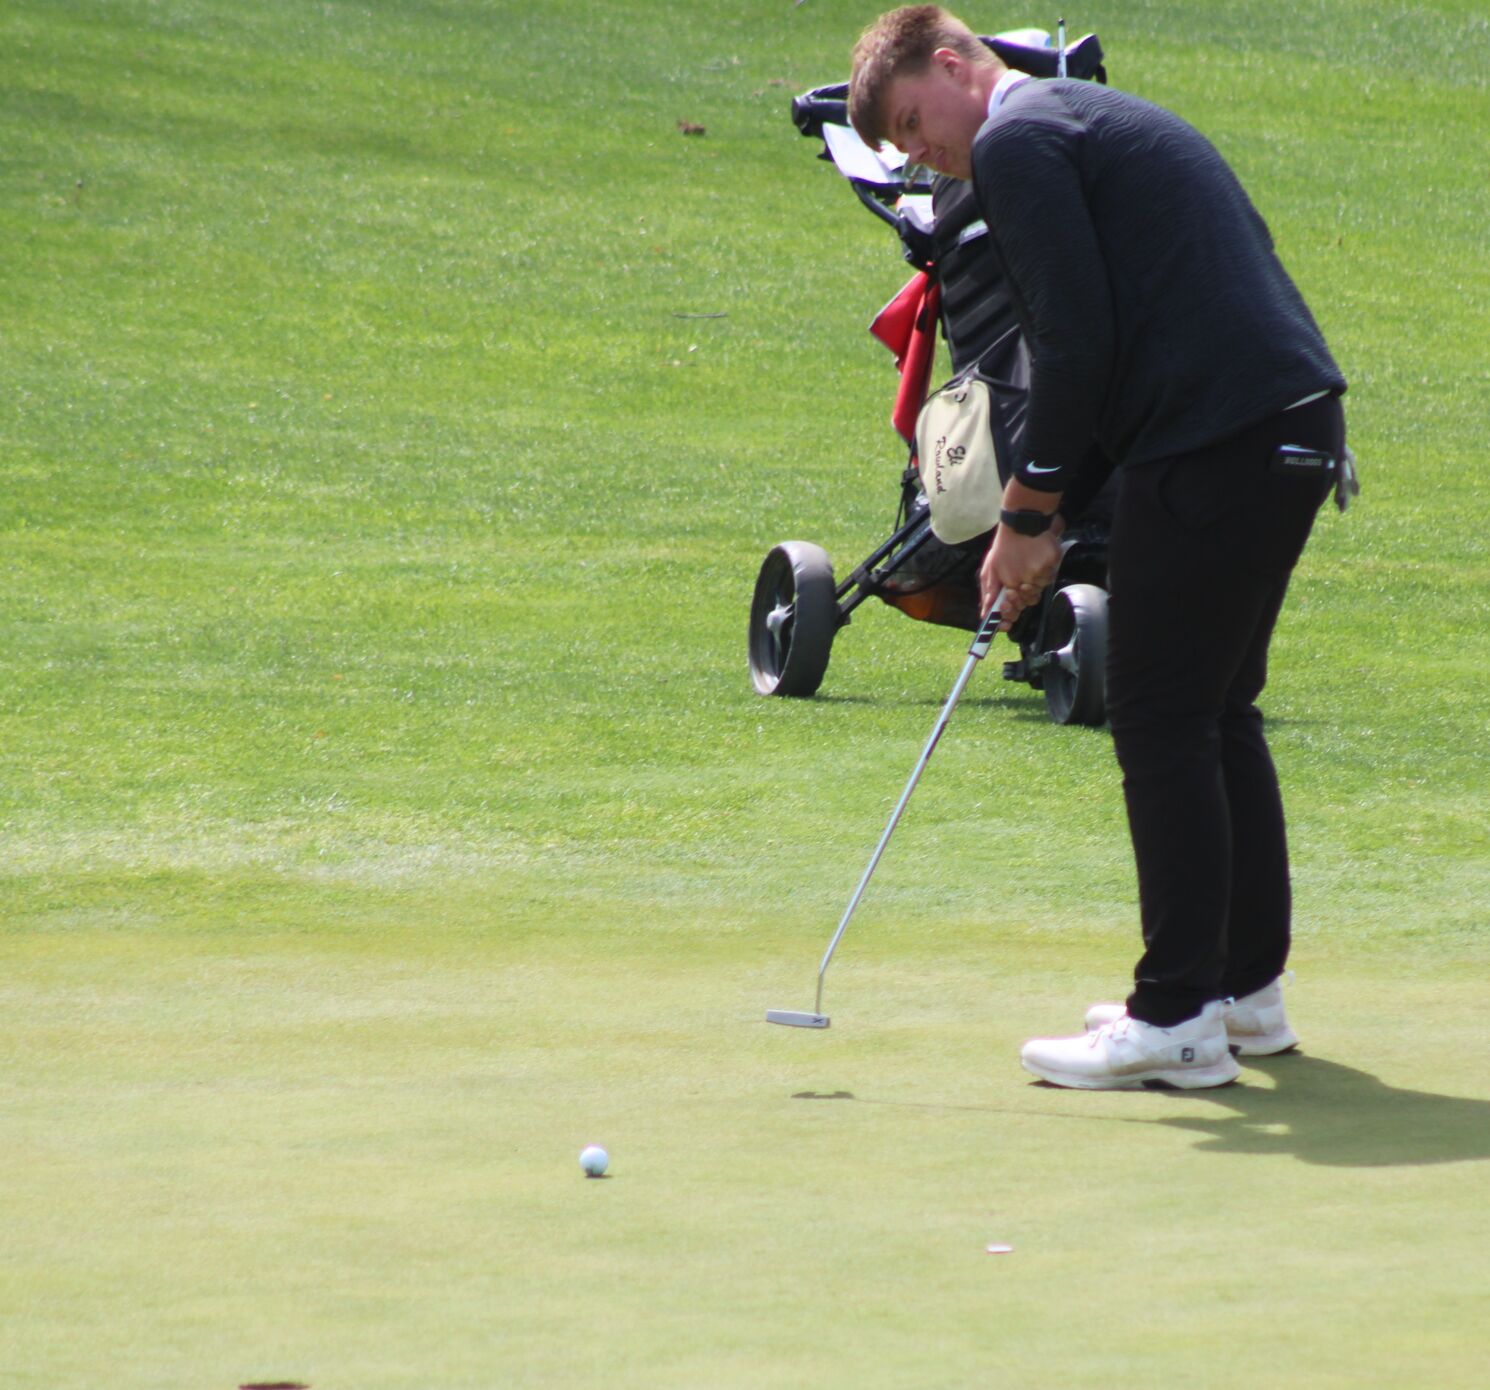 Franklin Golf Invite: Center Grove Secures Team Win, Carson Poe Co-Medalist with 2-Over 74s